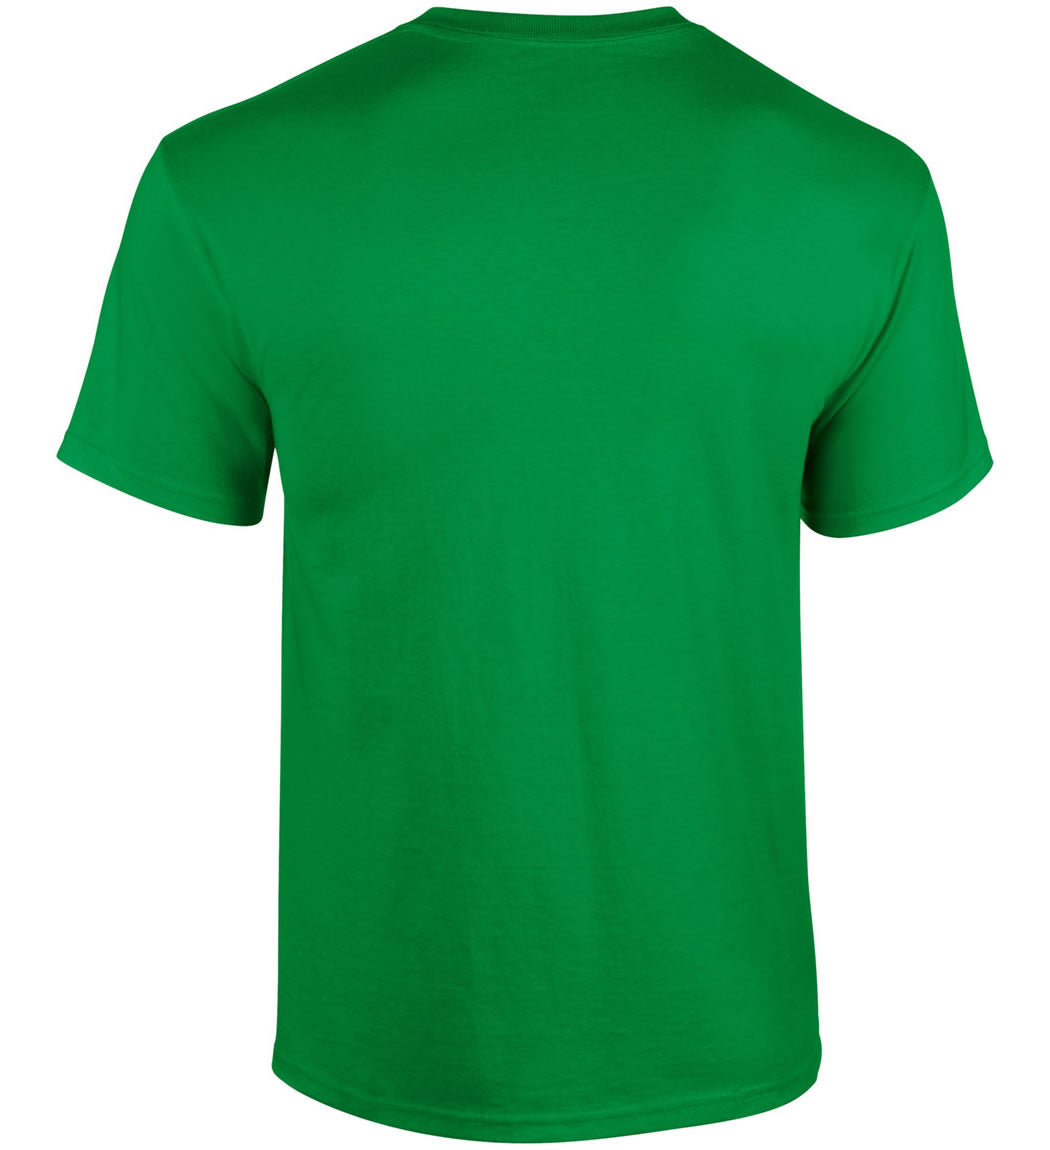 Cheers F*ckers St. Patrick's Day Men's T-Shirt